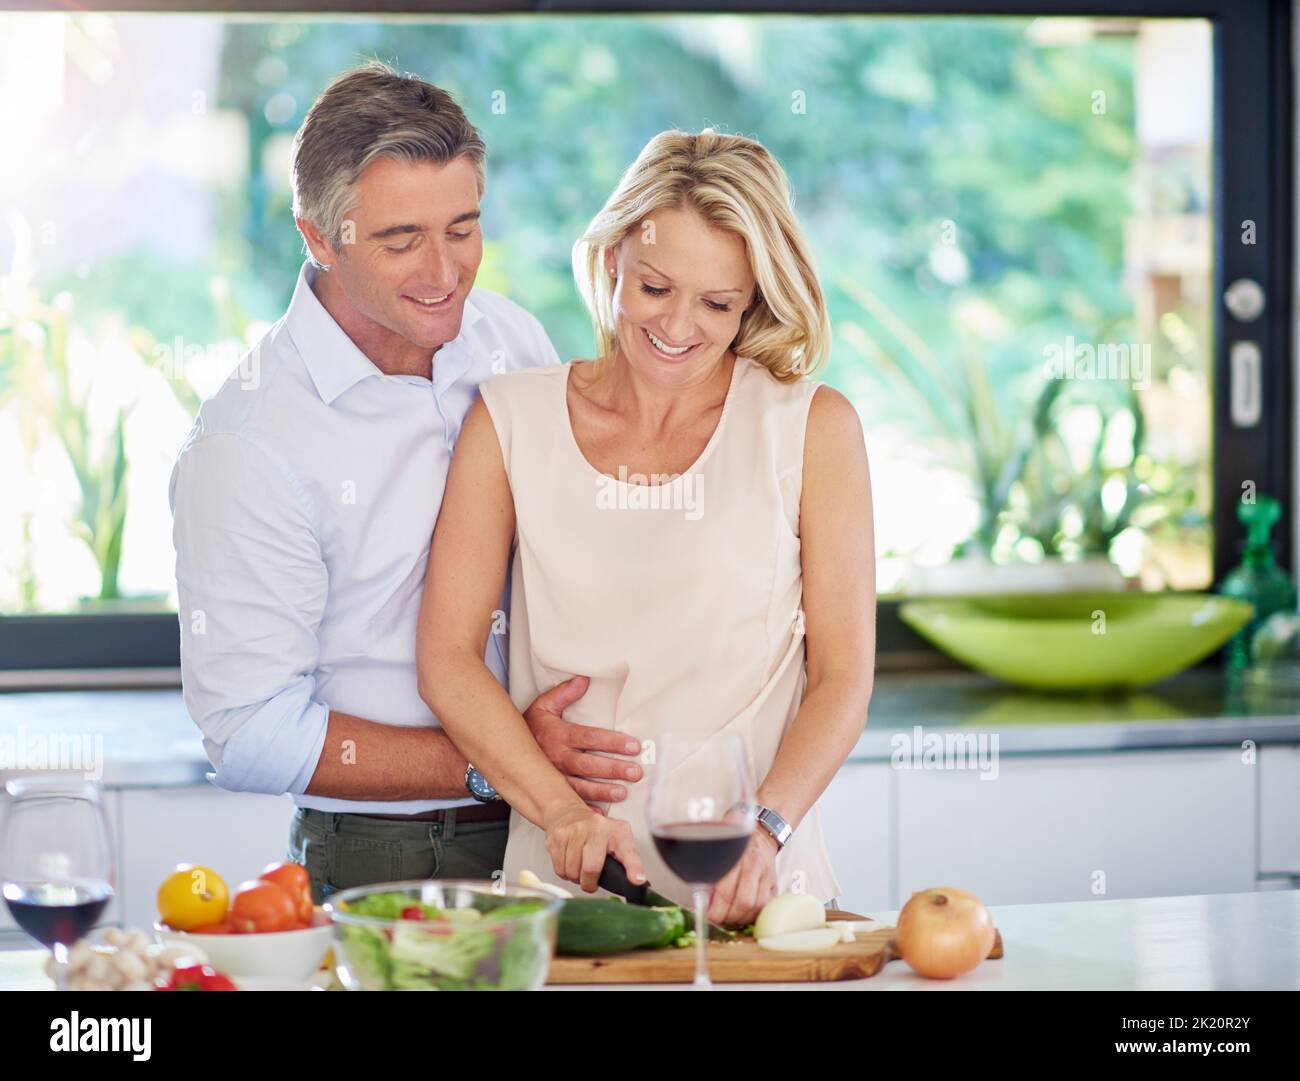 They do everything as a team. an affectionate couple cooking dinner. Stock Photo